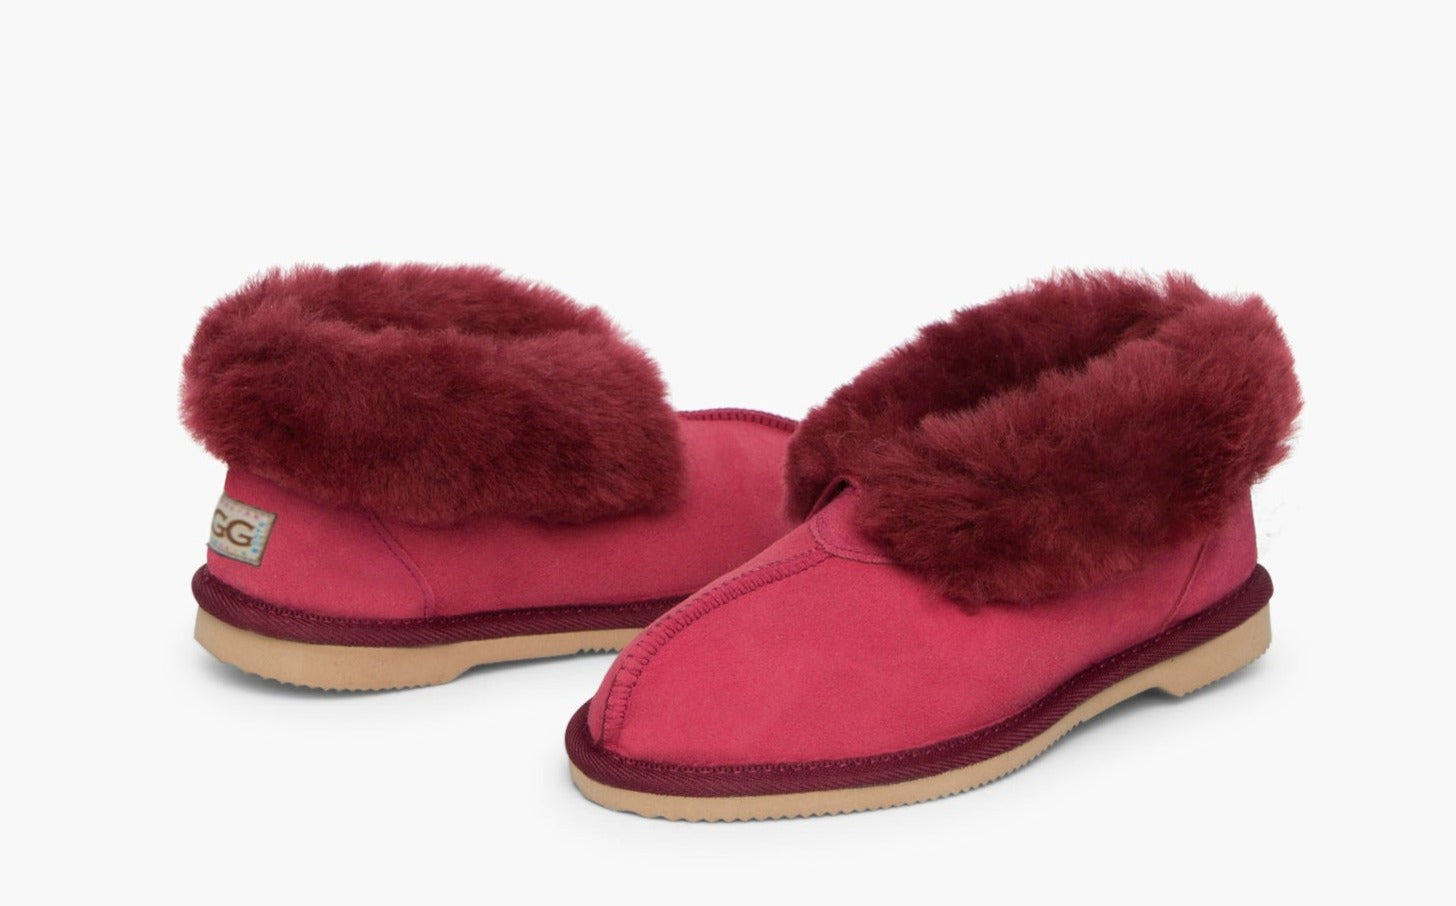 Kid's Ugg Slippers, with sheepskin rolled out at the top in Scarlet